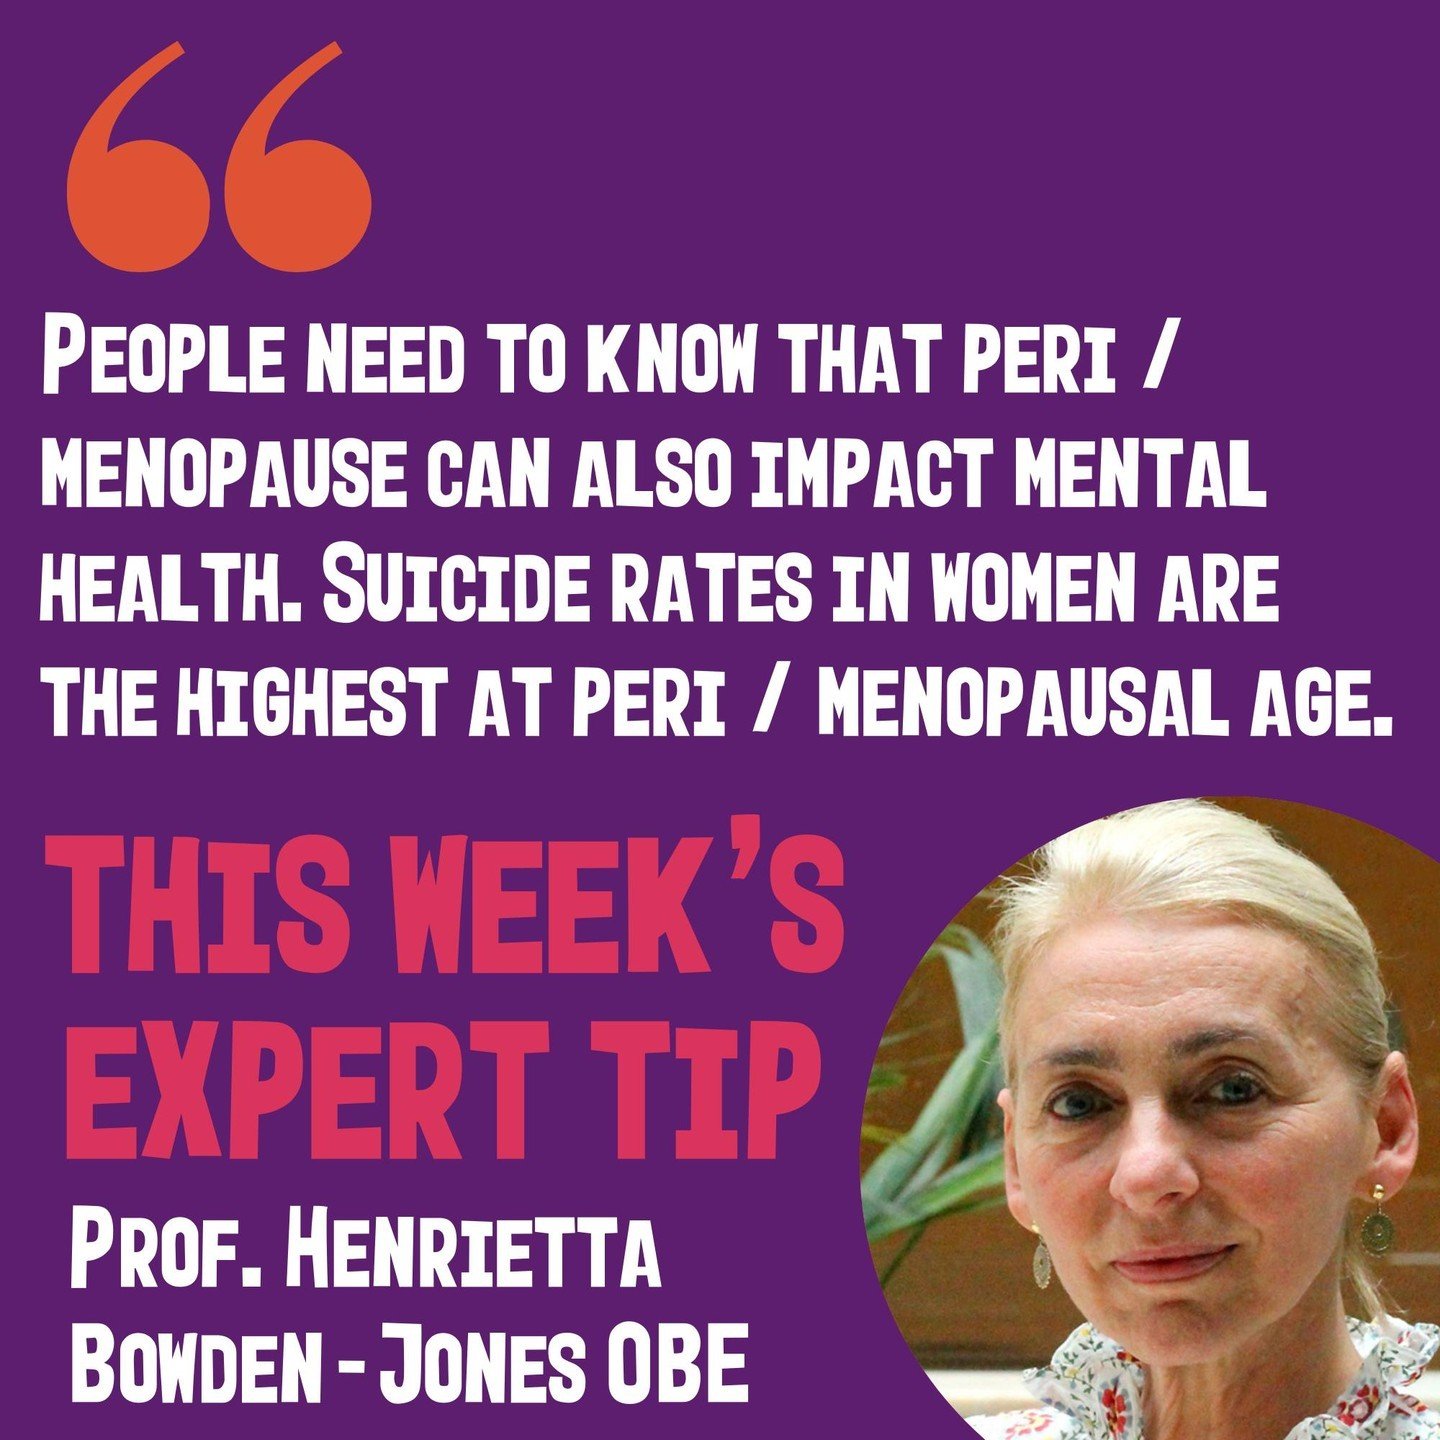 Prof Henrietta Bowden-Jones OBE is a consultant psychiatrist with a specialty in addictions.

Thank you for that great advice Professor. The impact of menopause on mental well-being is just as significant as its effects on physical health.

#Menopaus